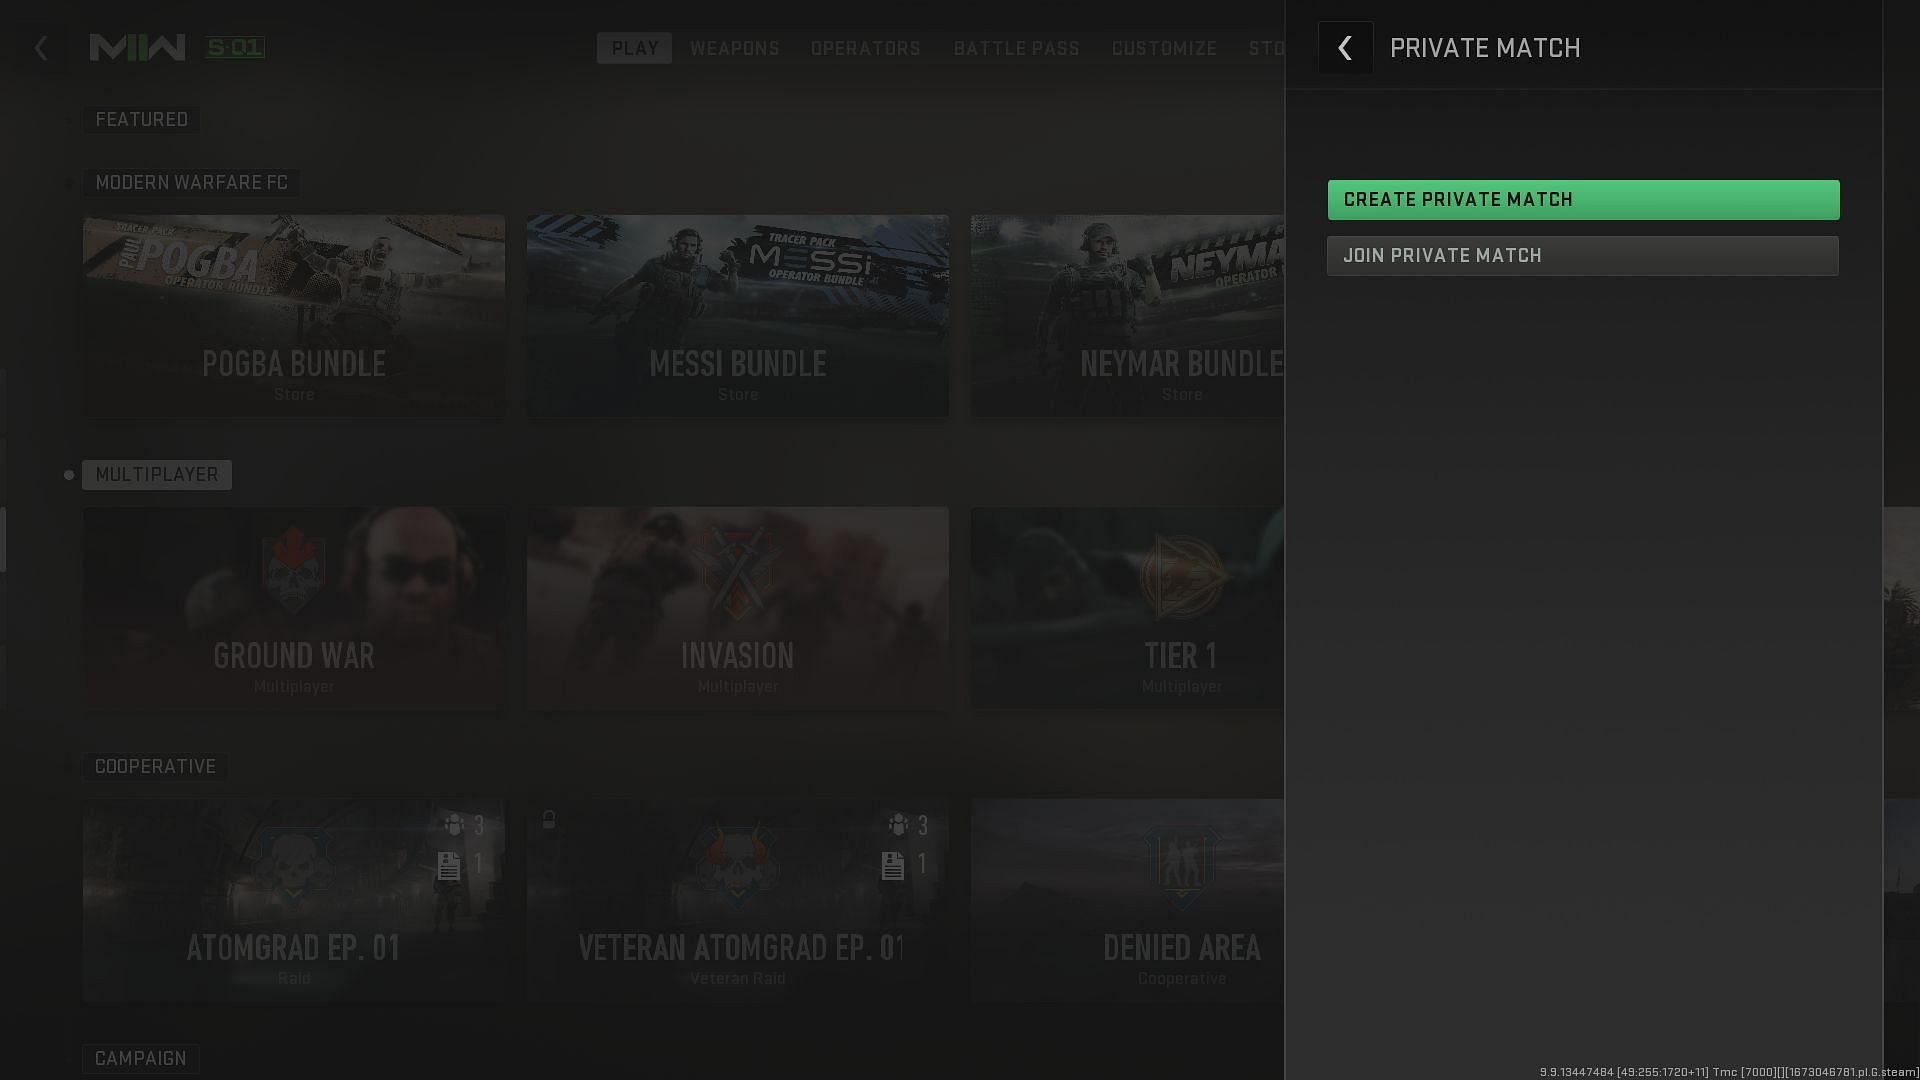 Creating a private match (Image via Activision)